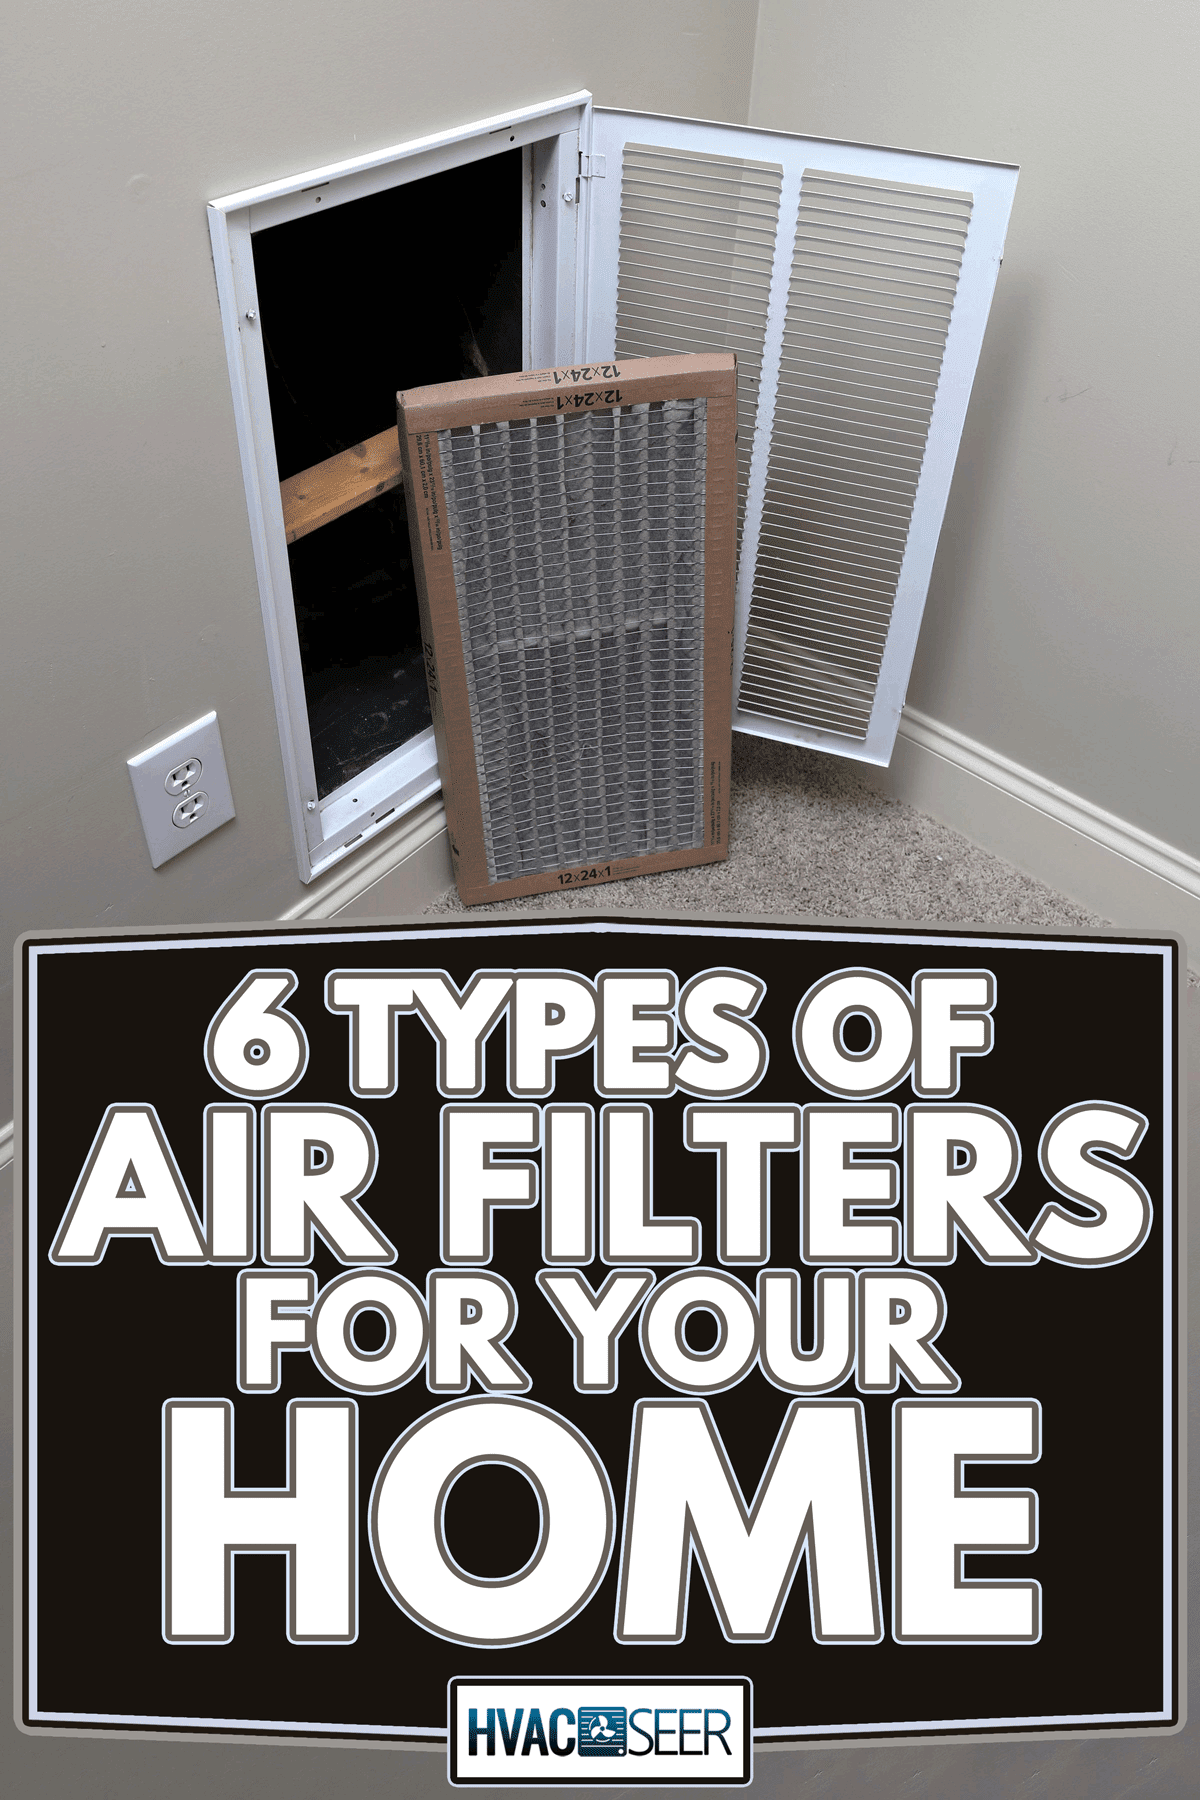 Replacing dirty air filter for air conditioner system maintenance, 6 Types Of Air Filters For Your Home